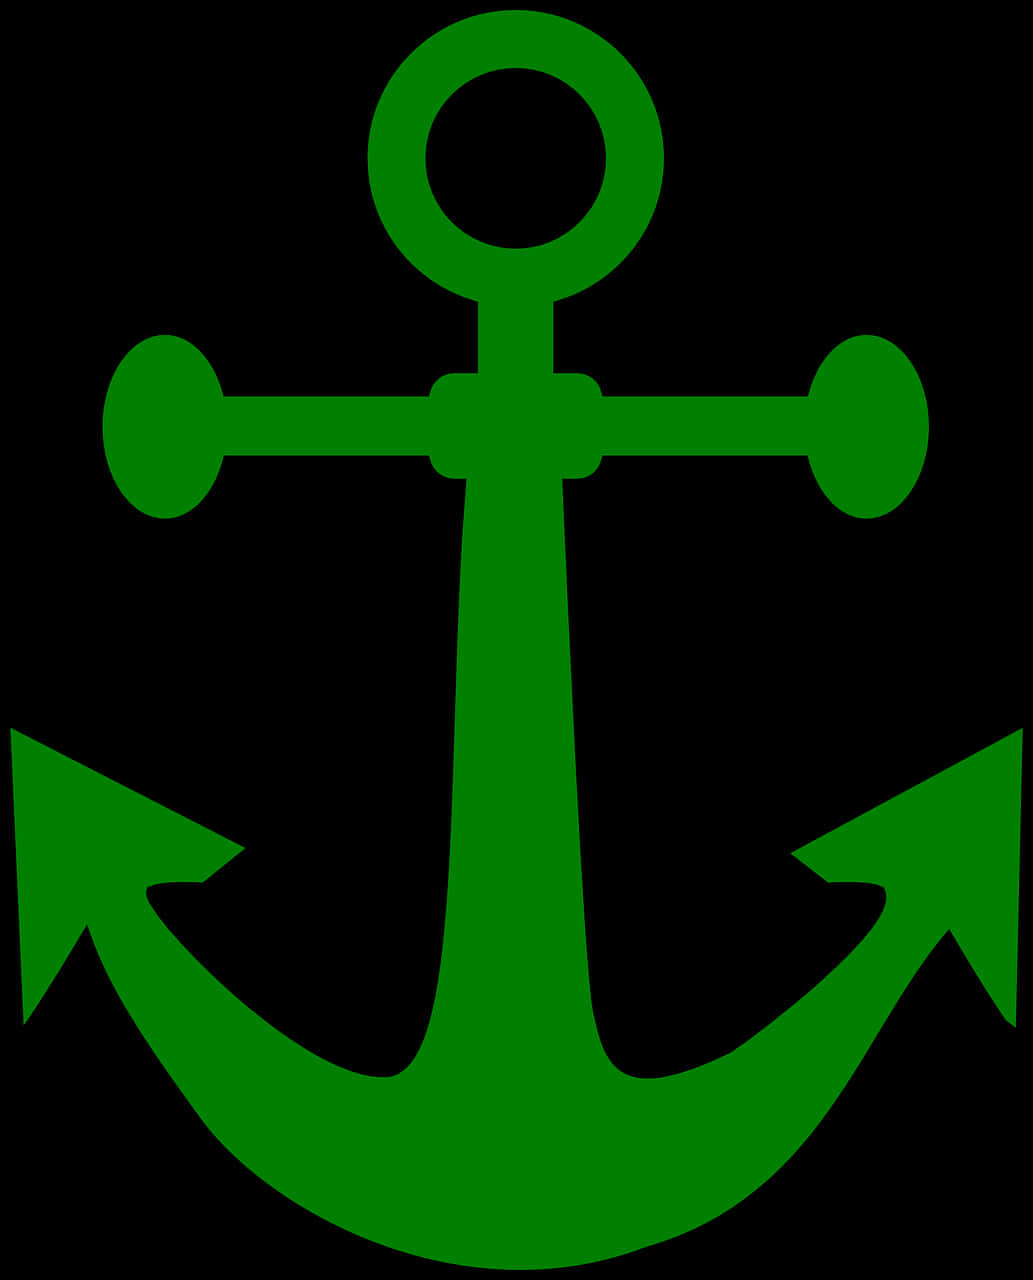 Green Anchor Graphic